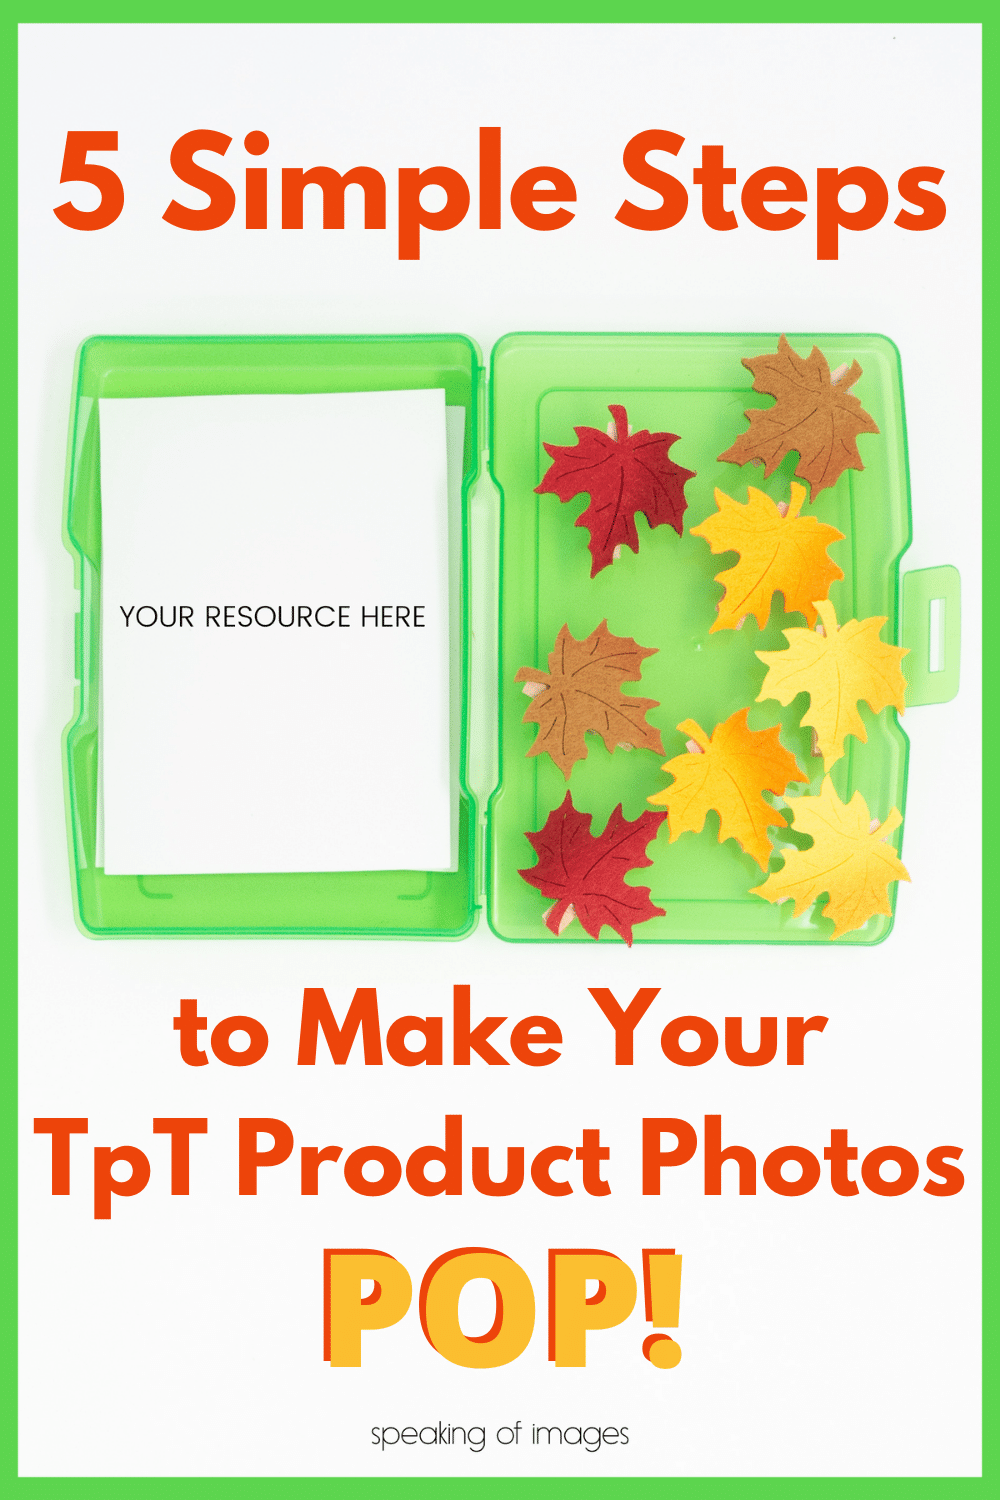 This blog post details 5 simple and strategic steps for creating amazing flat lay images for your TpT product photos.